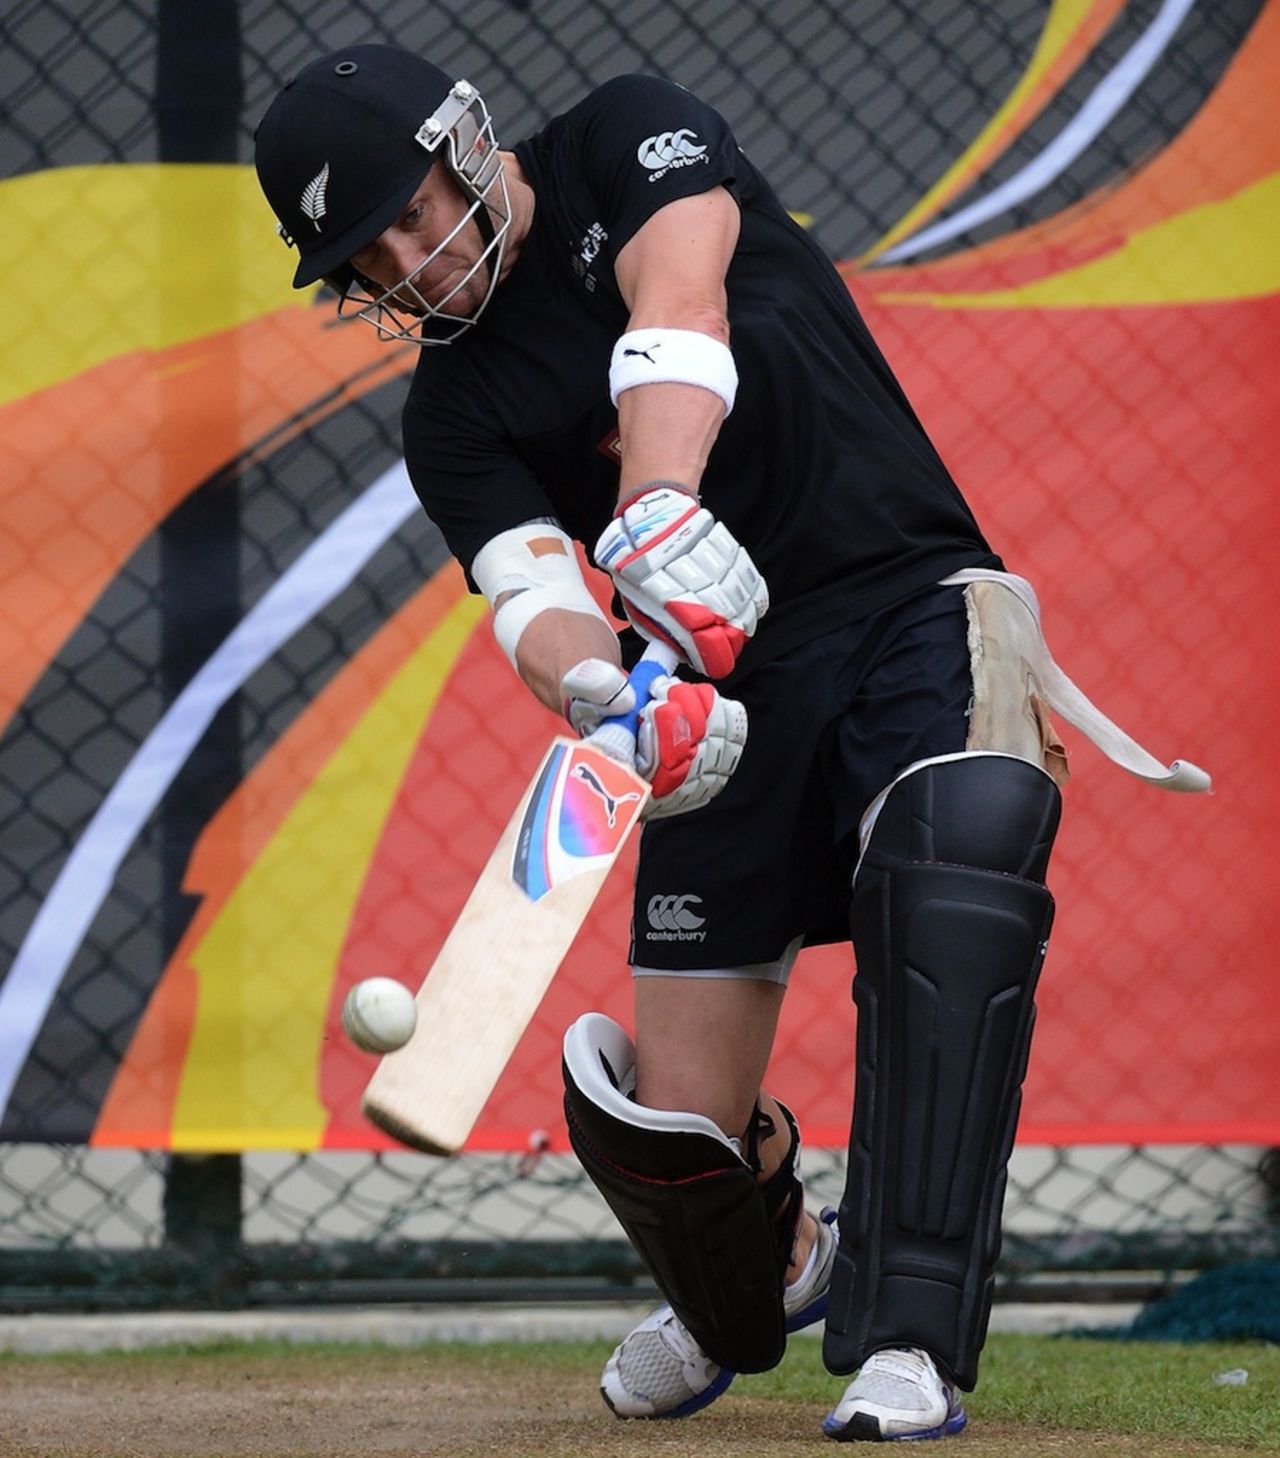 Brendon McCullum hits out in the nets, World T20 2012, Pallekele, September 20, 2012